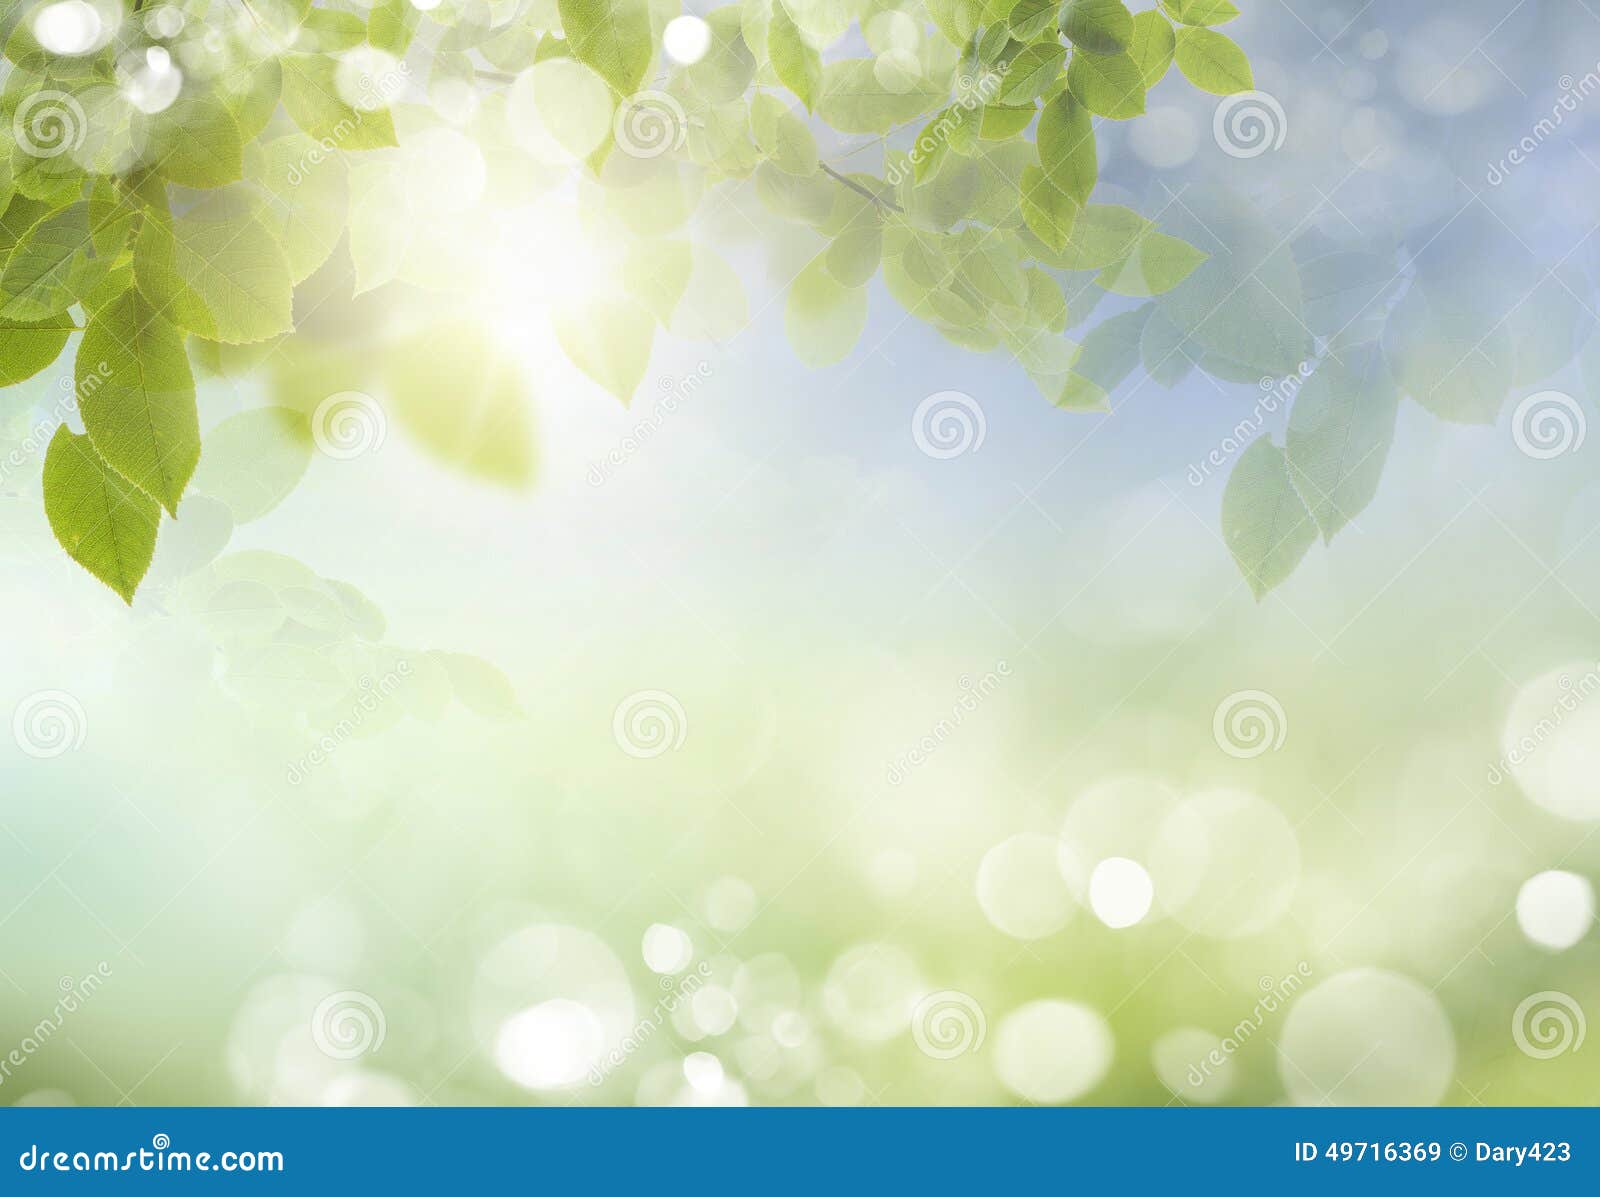 spring or summer season abstract nature background